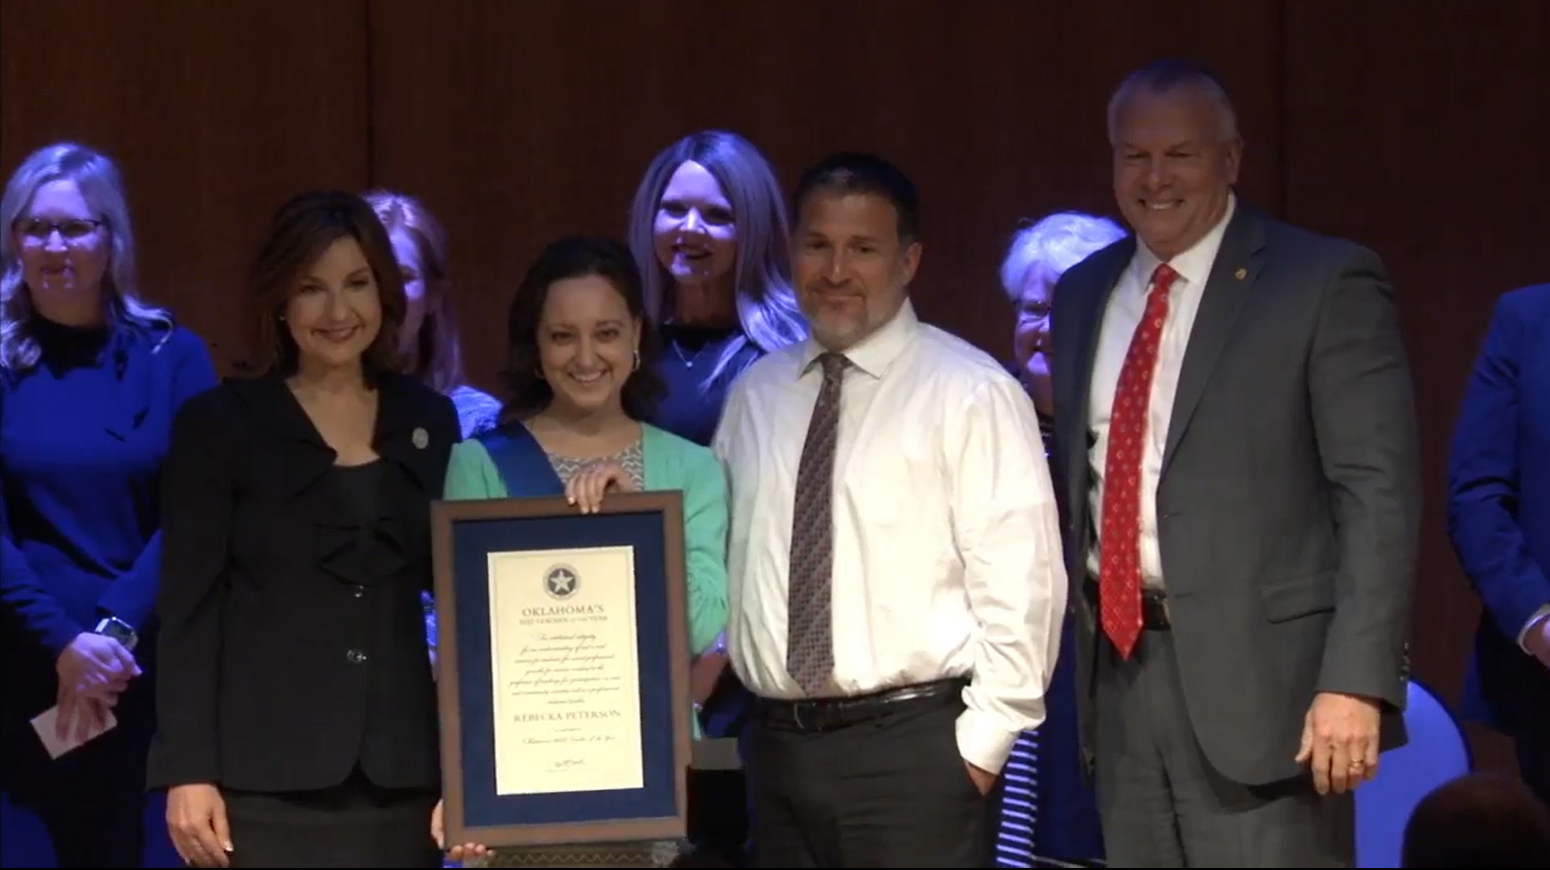 Union Students Express Pride for Oklahoma's Teacher of the Year